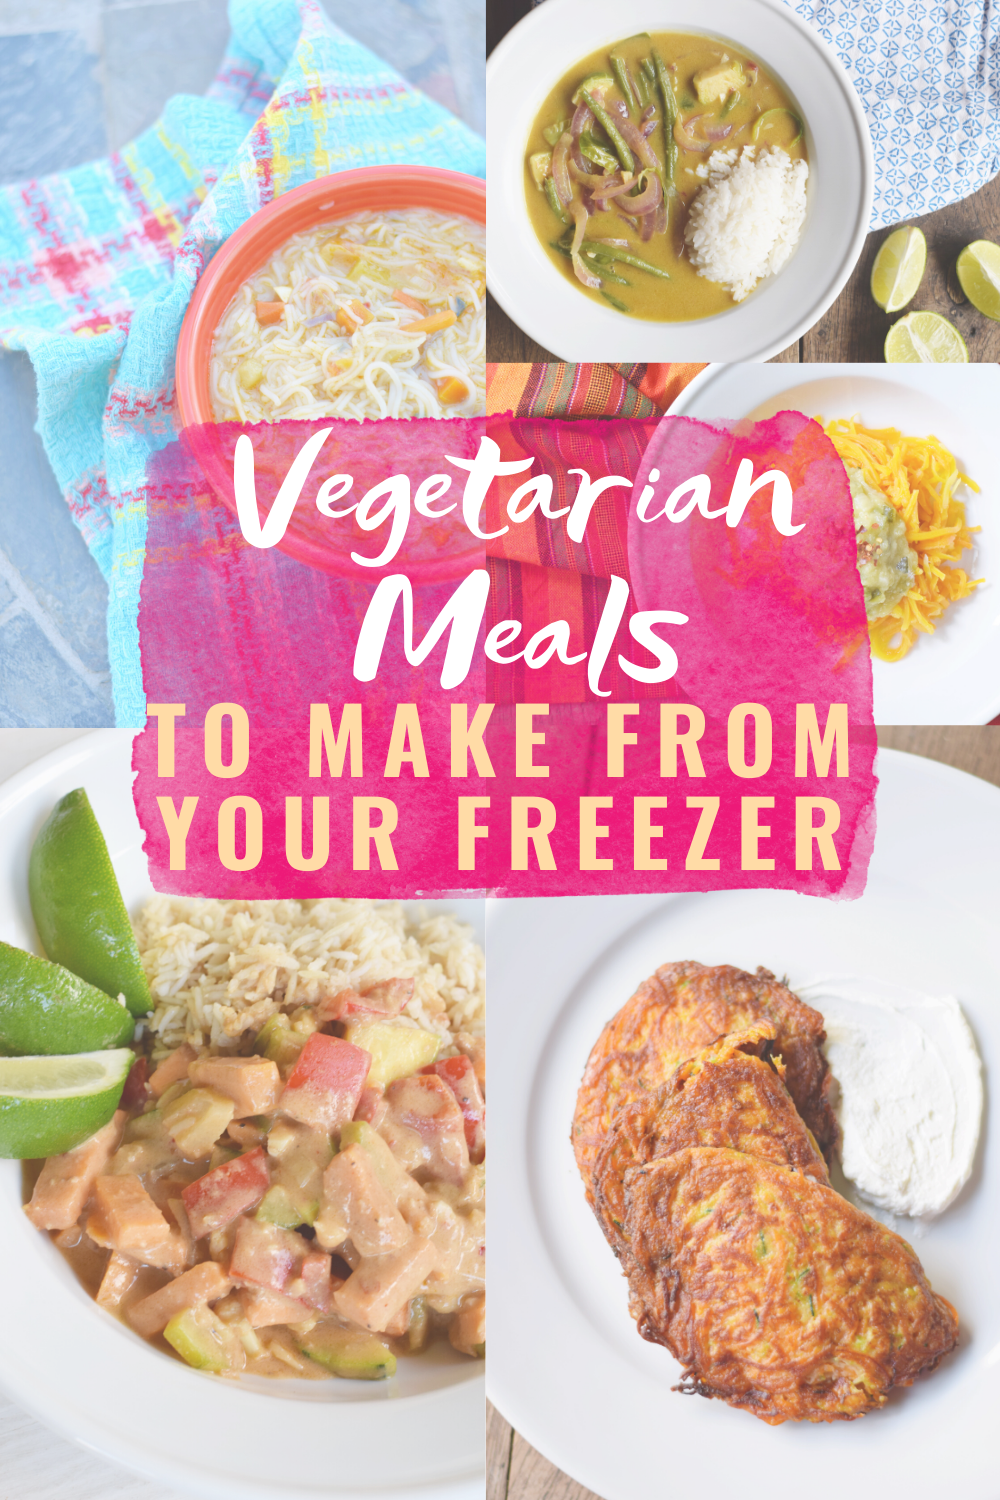 Vegetarian Meals To Make From Your Freezer - Stuck on what to make for dinner? Here are 9 easy vegetarian freezer meals! | Freezer Meals - Easy Freezer Meals - Vegetarian Recipe Ideas - Healthy Freezer Meals 